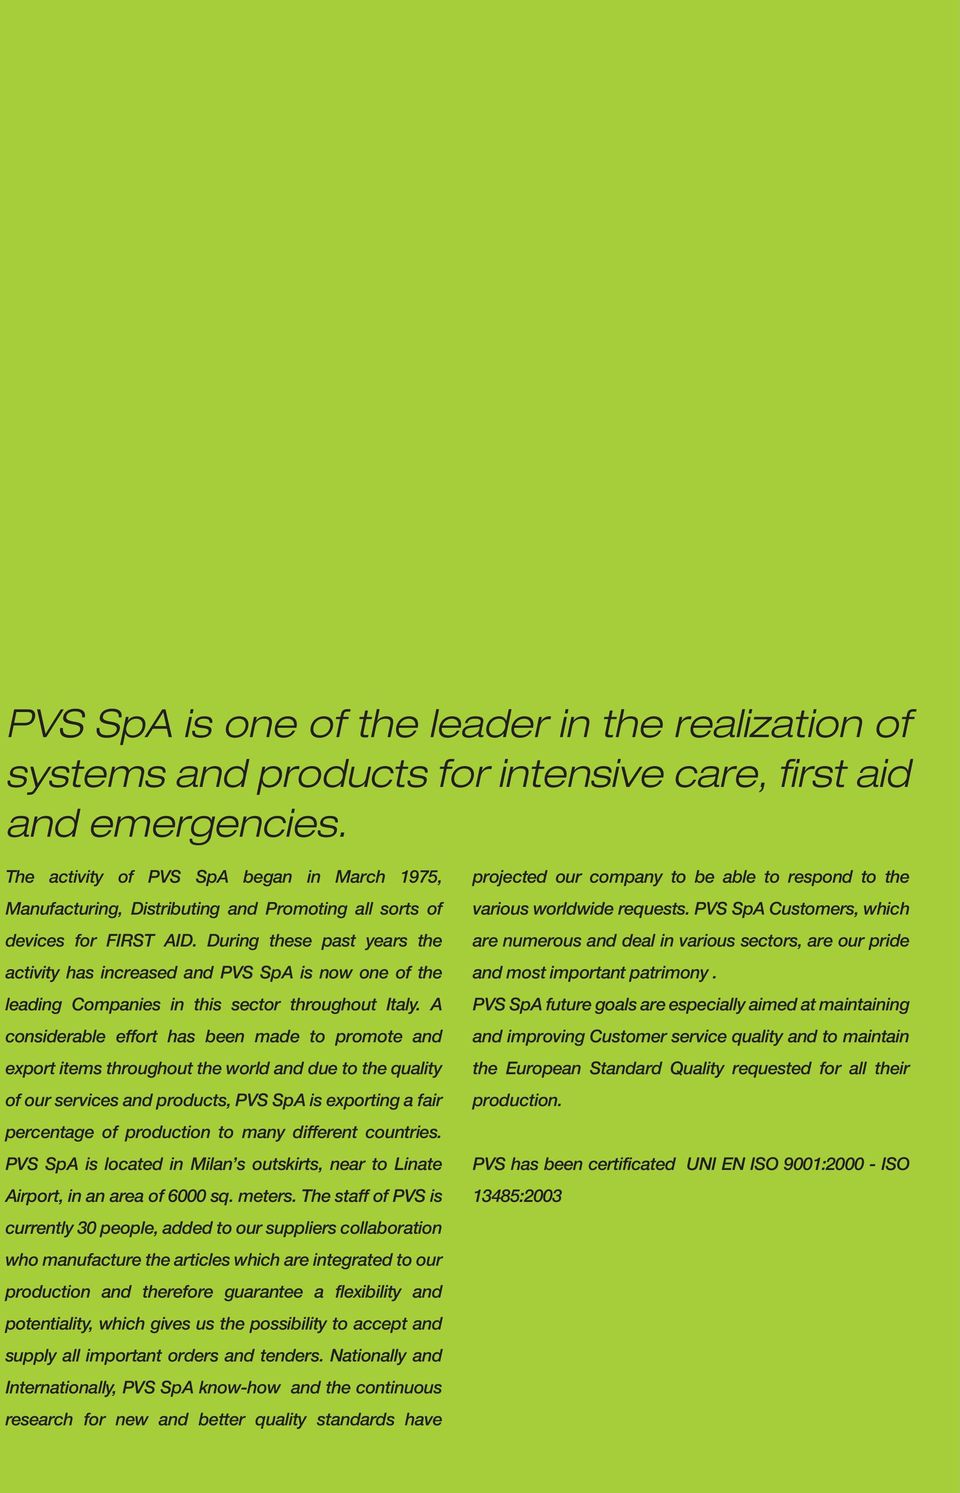 During these past years the activity has increased and PVS SpA is now one of the leading Companies in this sector throughout Italy.